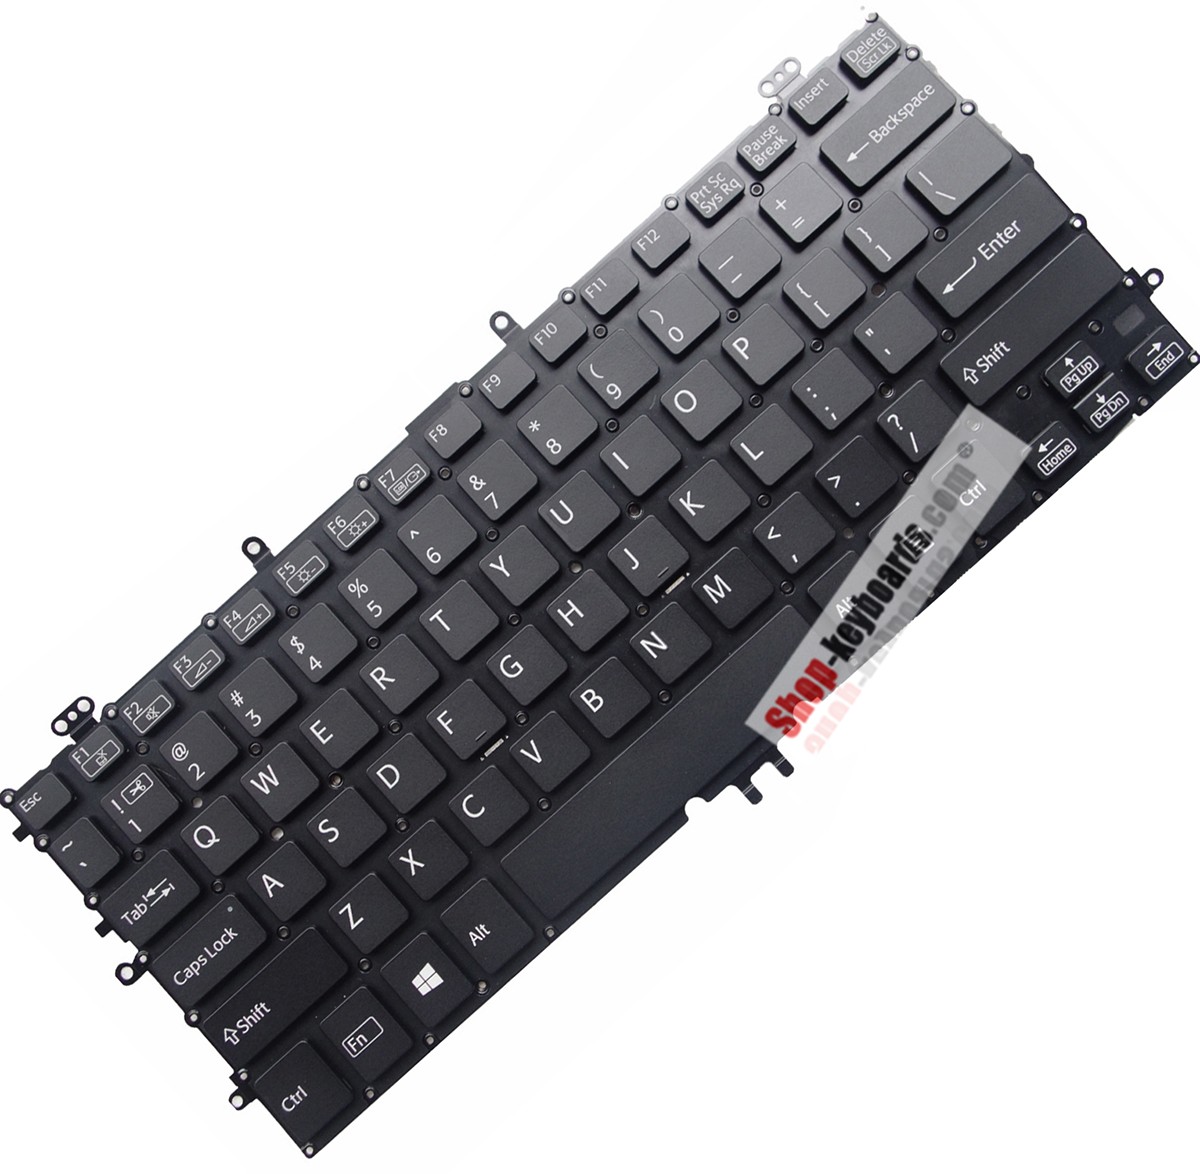 Sony VAIO SVF11N1L2EP  Keyboard replacement